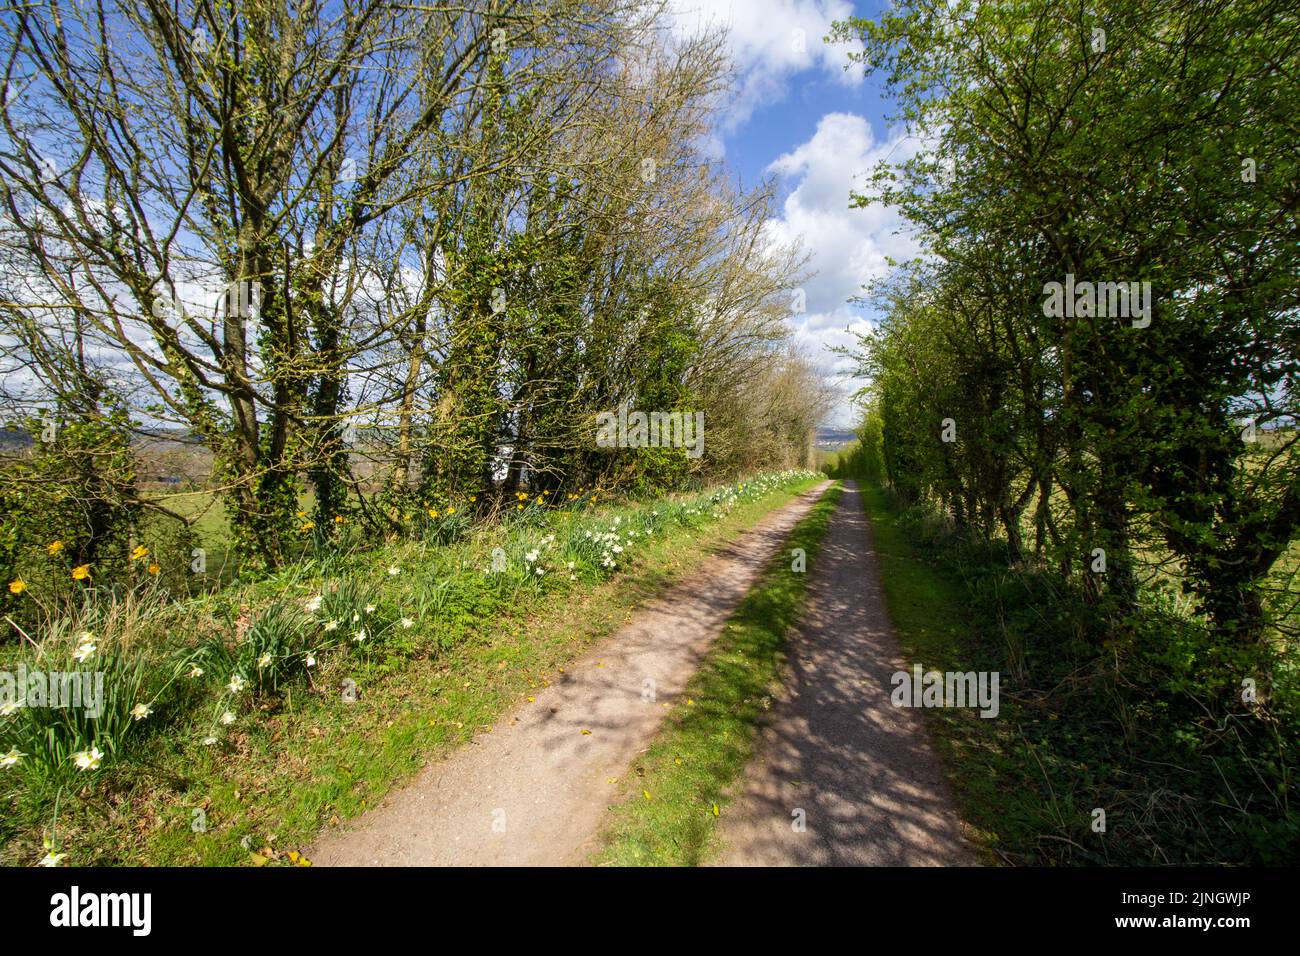 country lane and farm road in the West Country in Winter with bare trees, hedge rows, green fields and clear blue skies Stock Photo